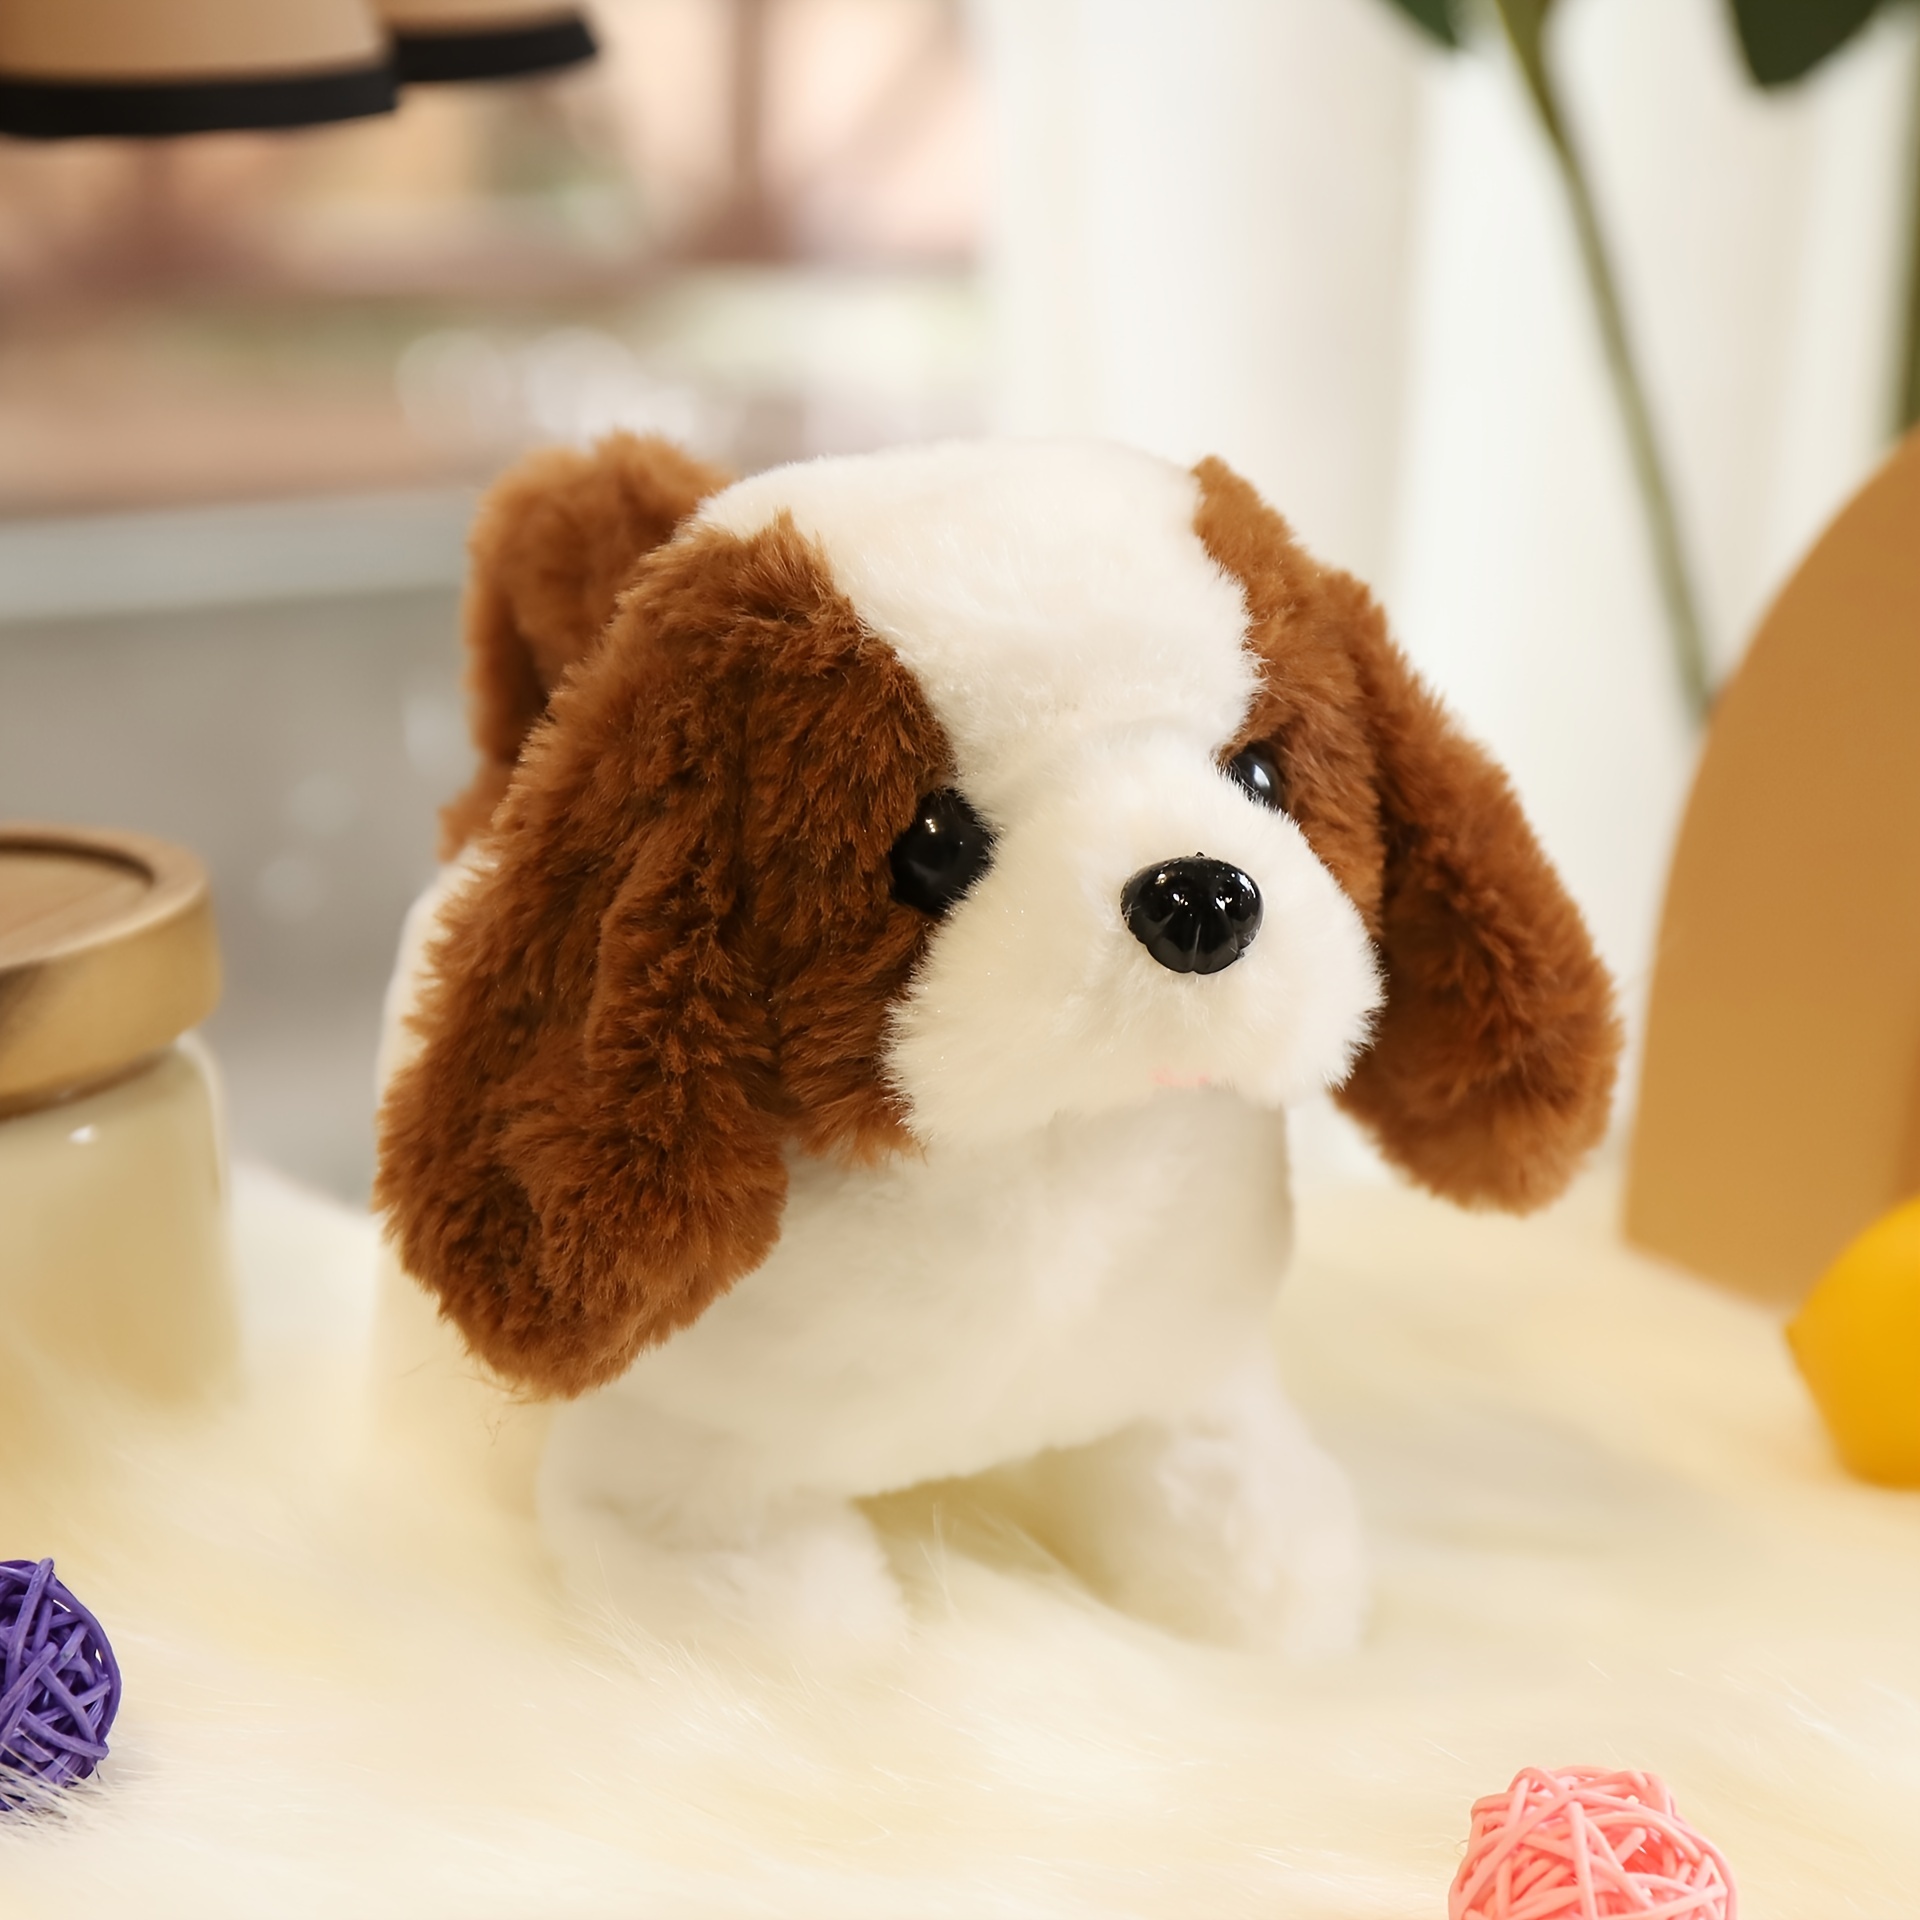 Interactive Dog Toy Kids, Electric Puppy Plush Toy